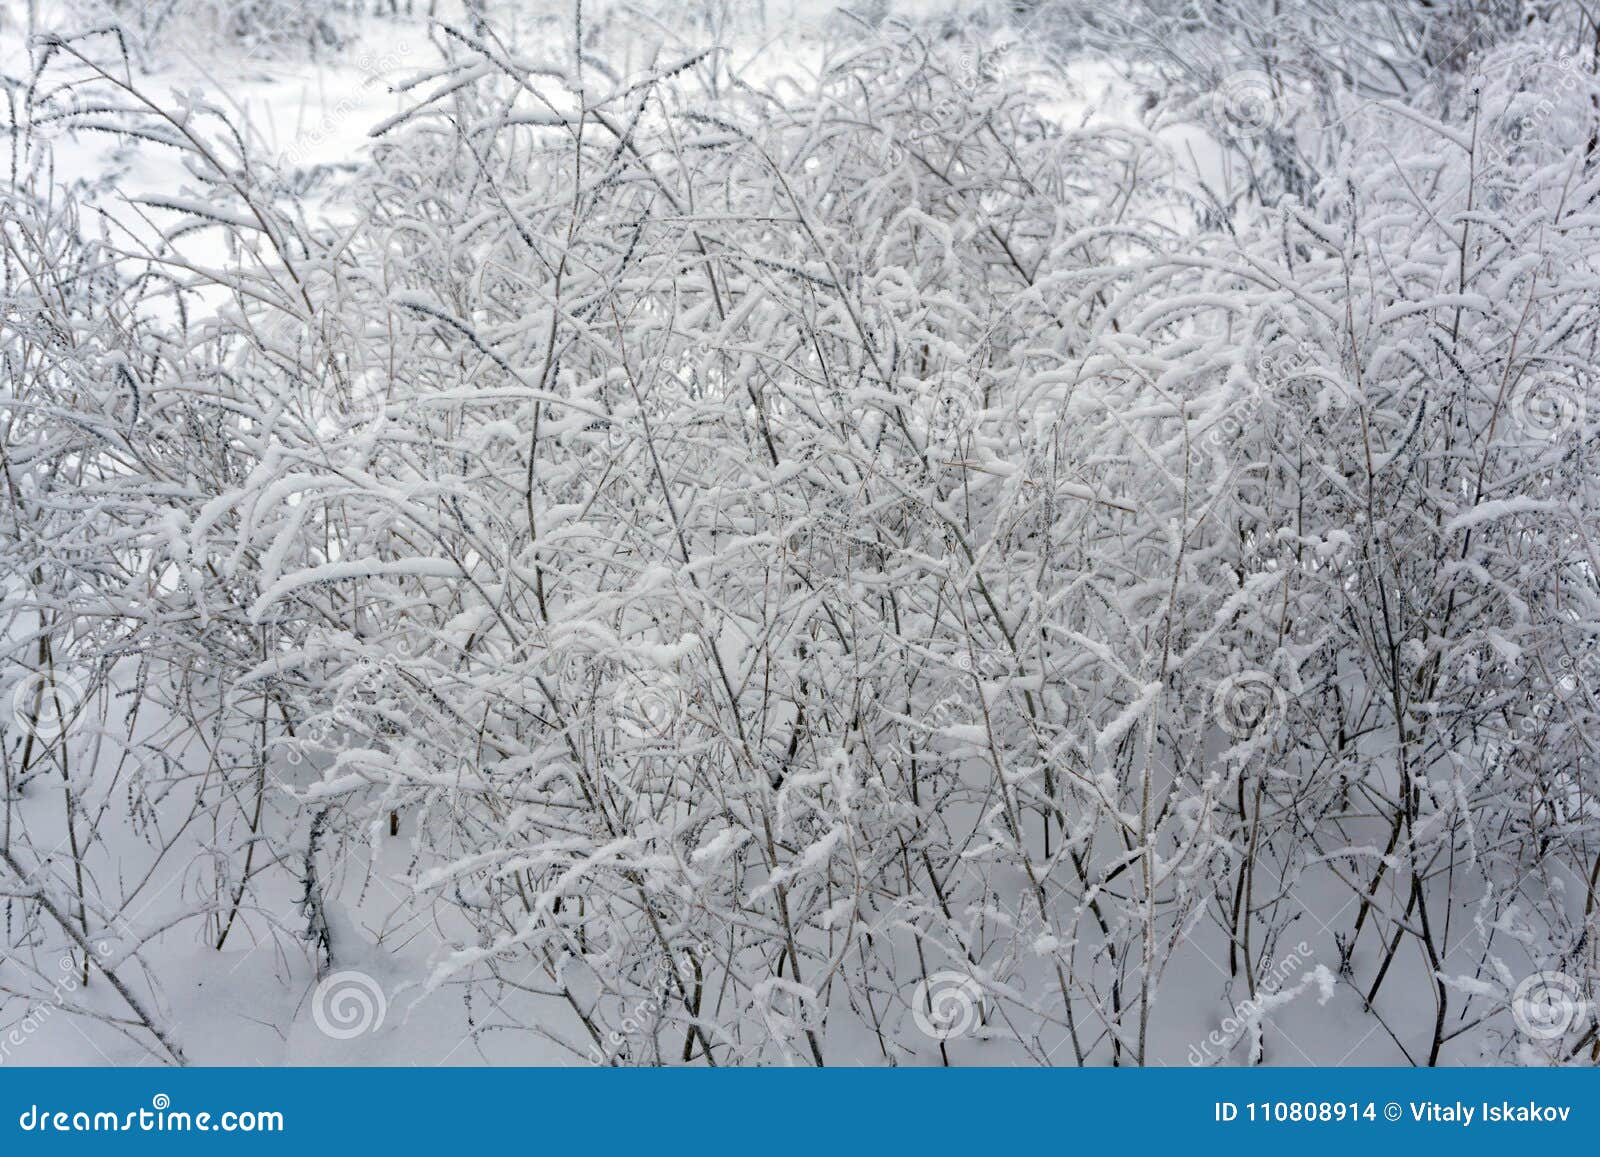 snow-covered branches in winter snow branches ranches